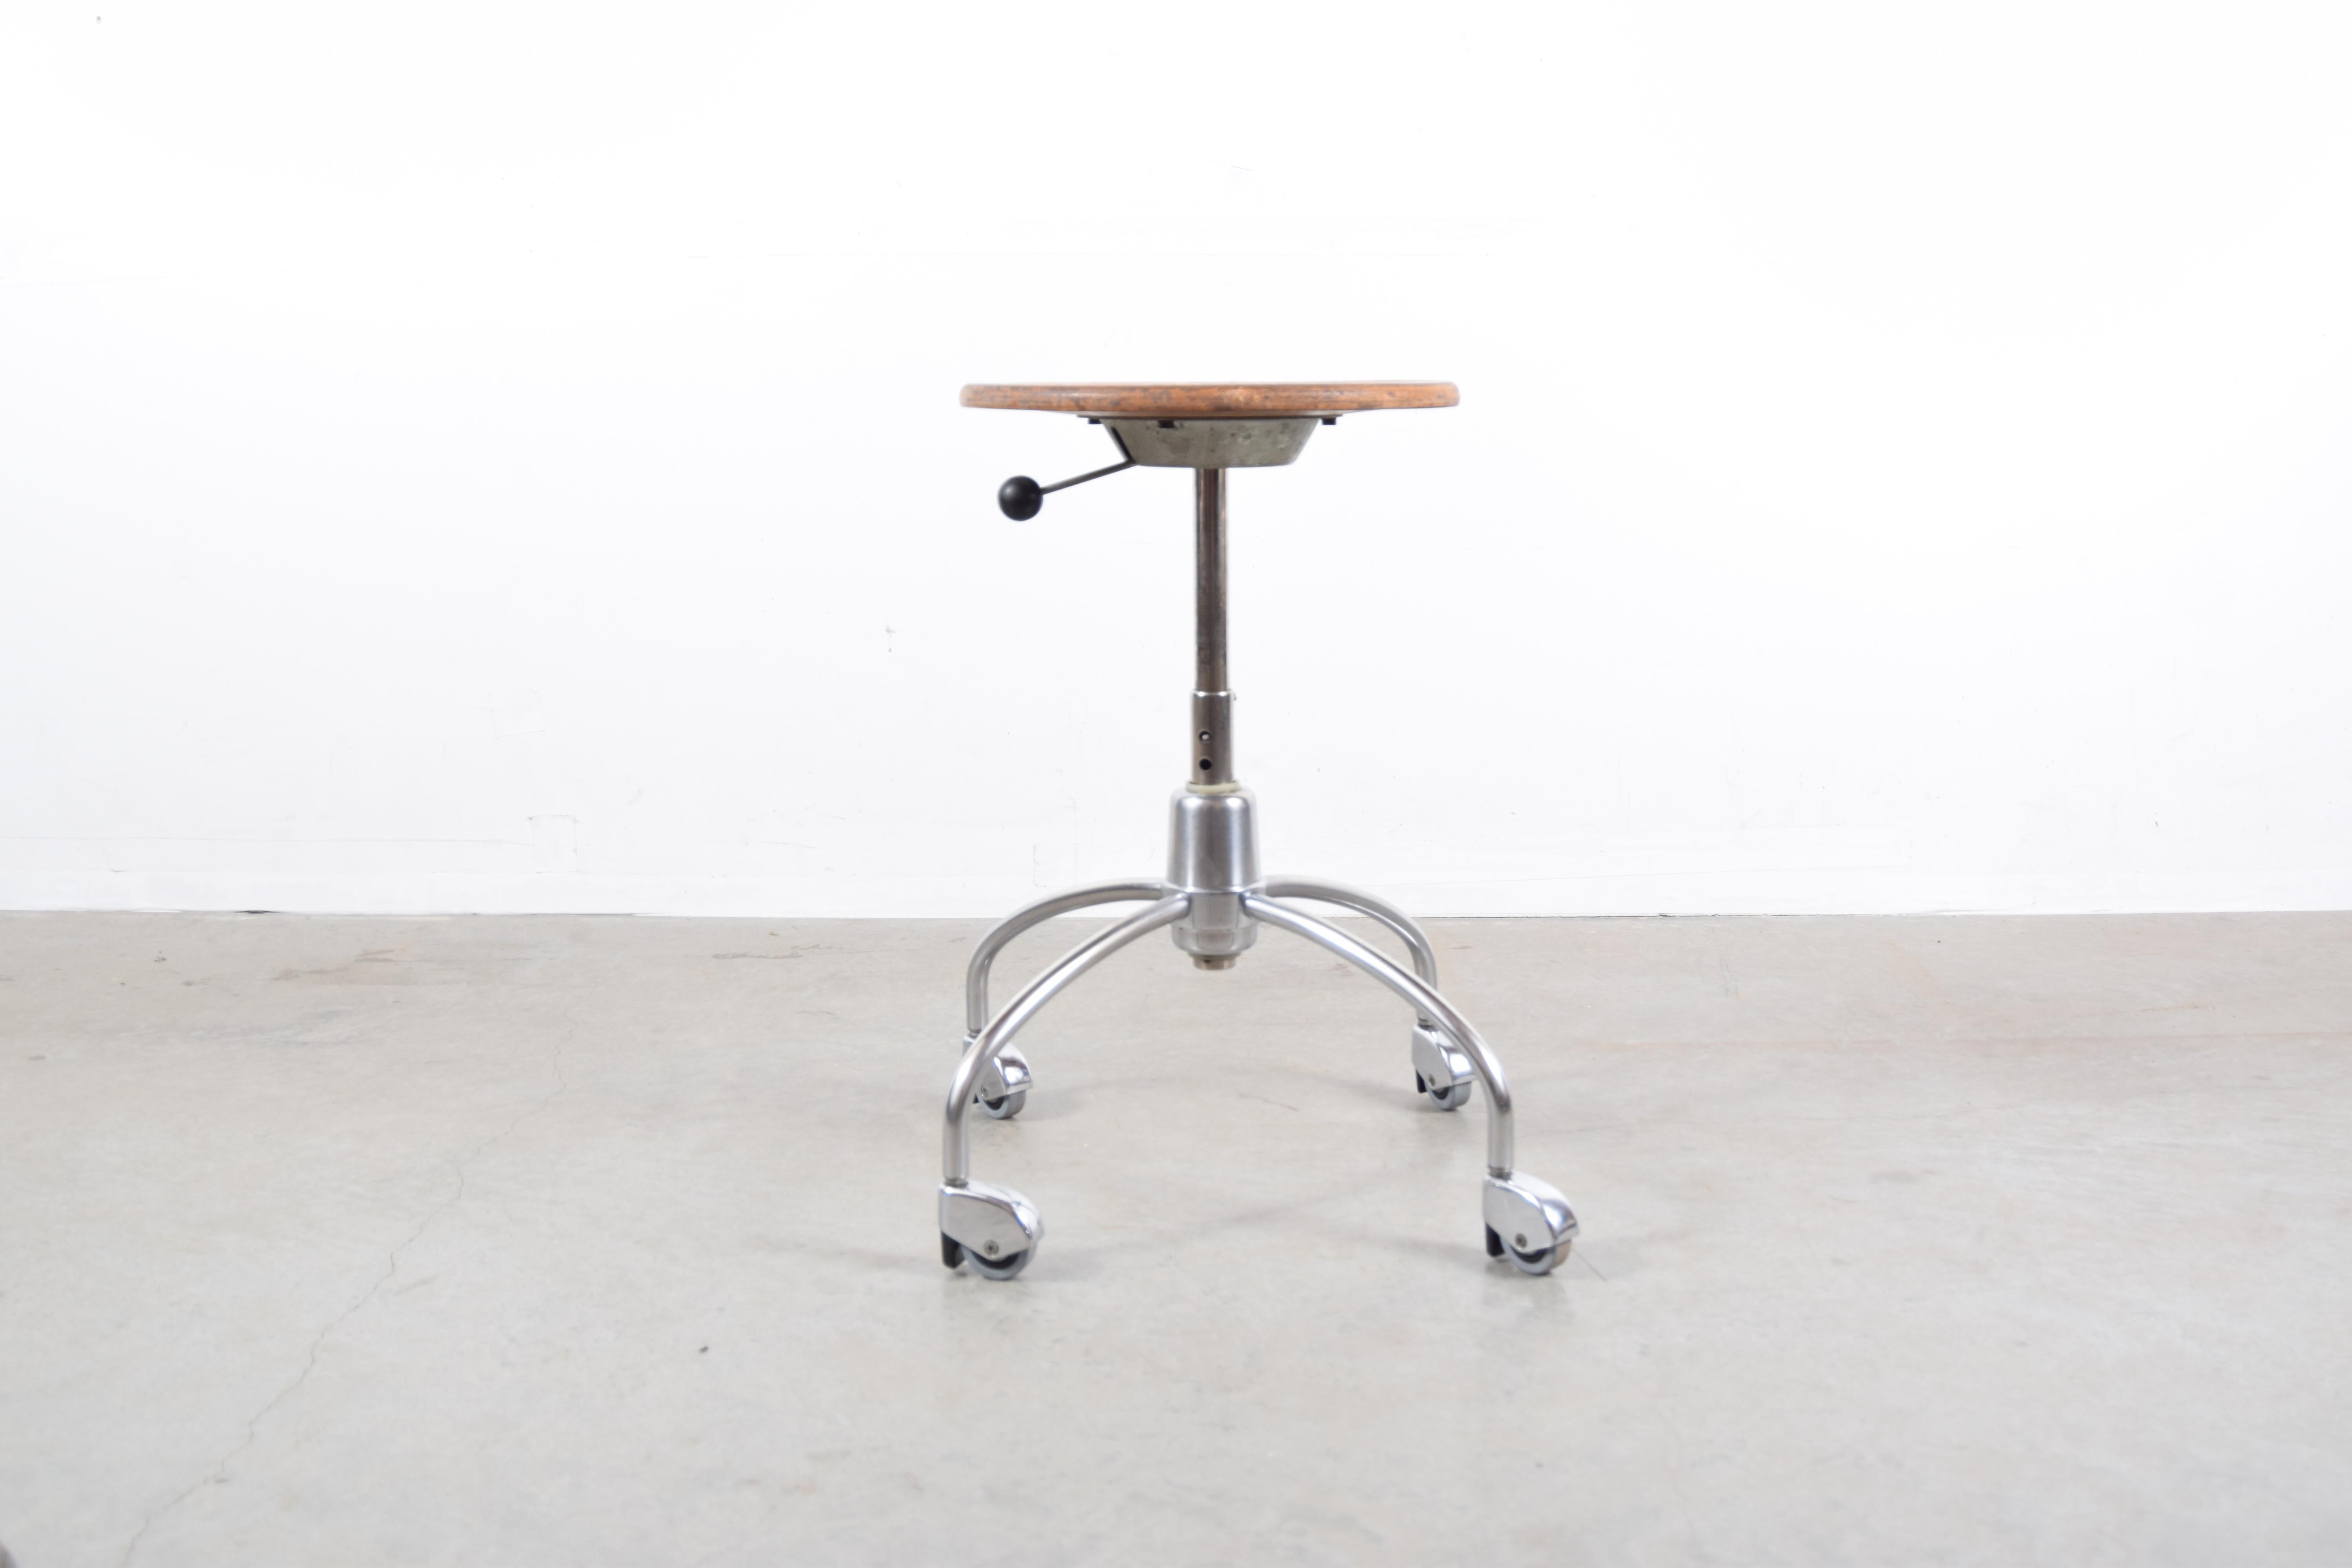 SE43 stool, designed circa 1949 by Architect Egon Eiermann (1904 - 1970), and produced by Wilde + Spieth of Germany. Stool height is adjustable. Molded plywood seat shows minor, yet typical wear for a piece of this vintage.

Please note: Wheels